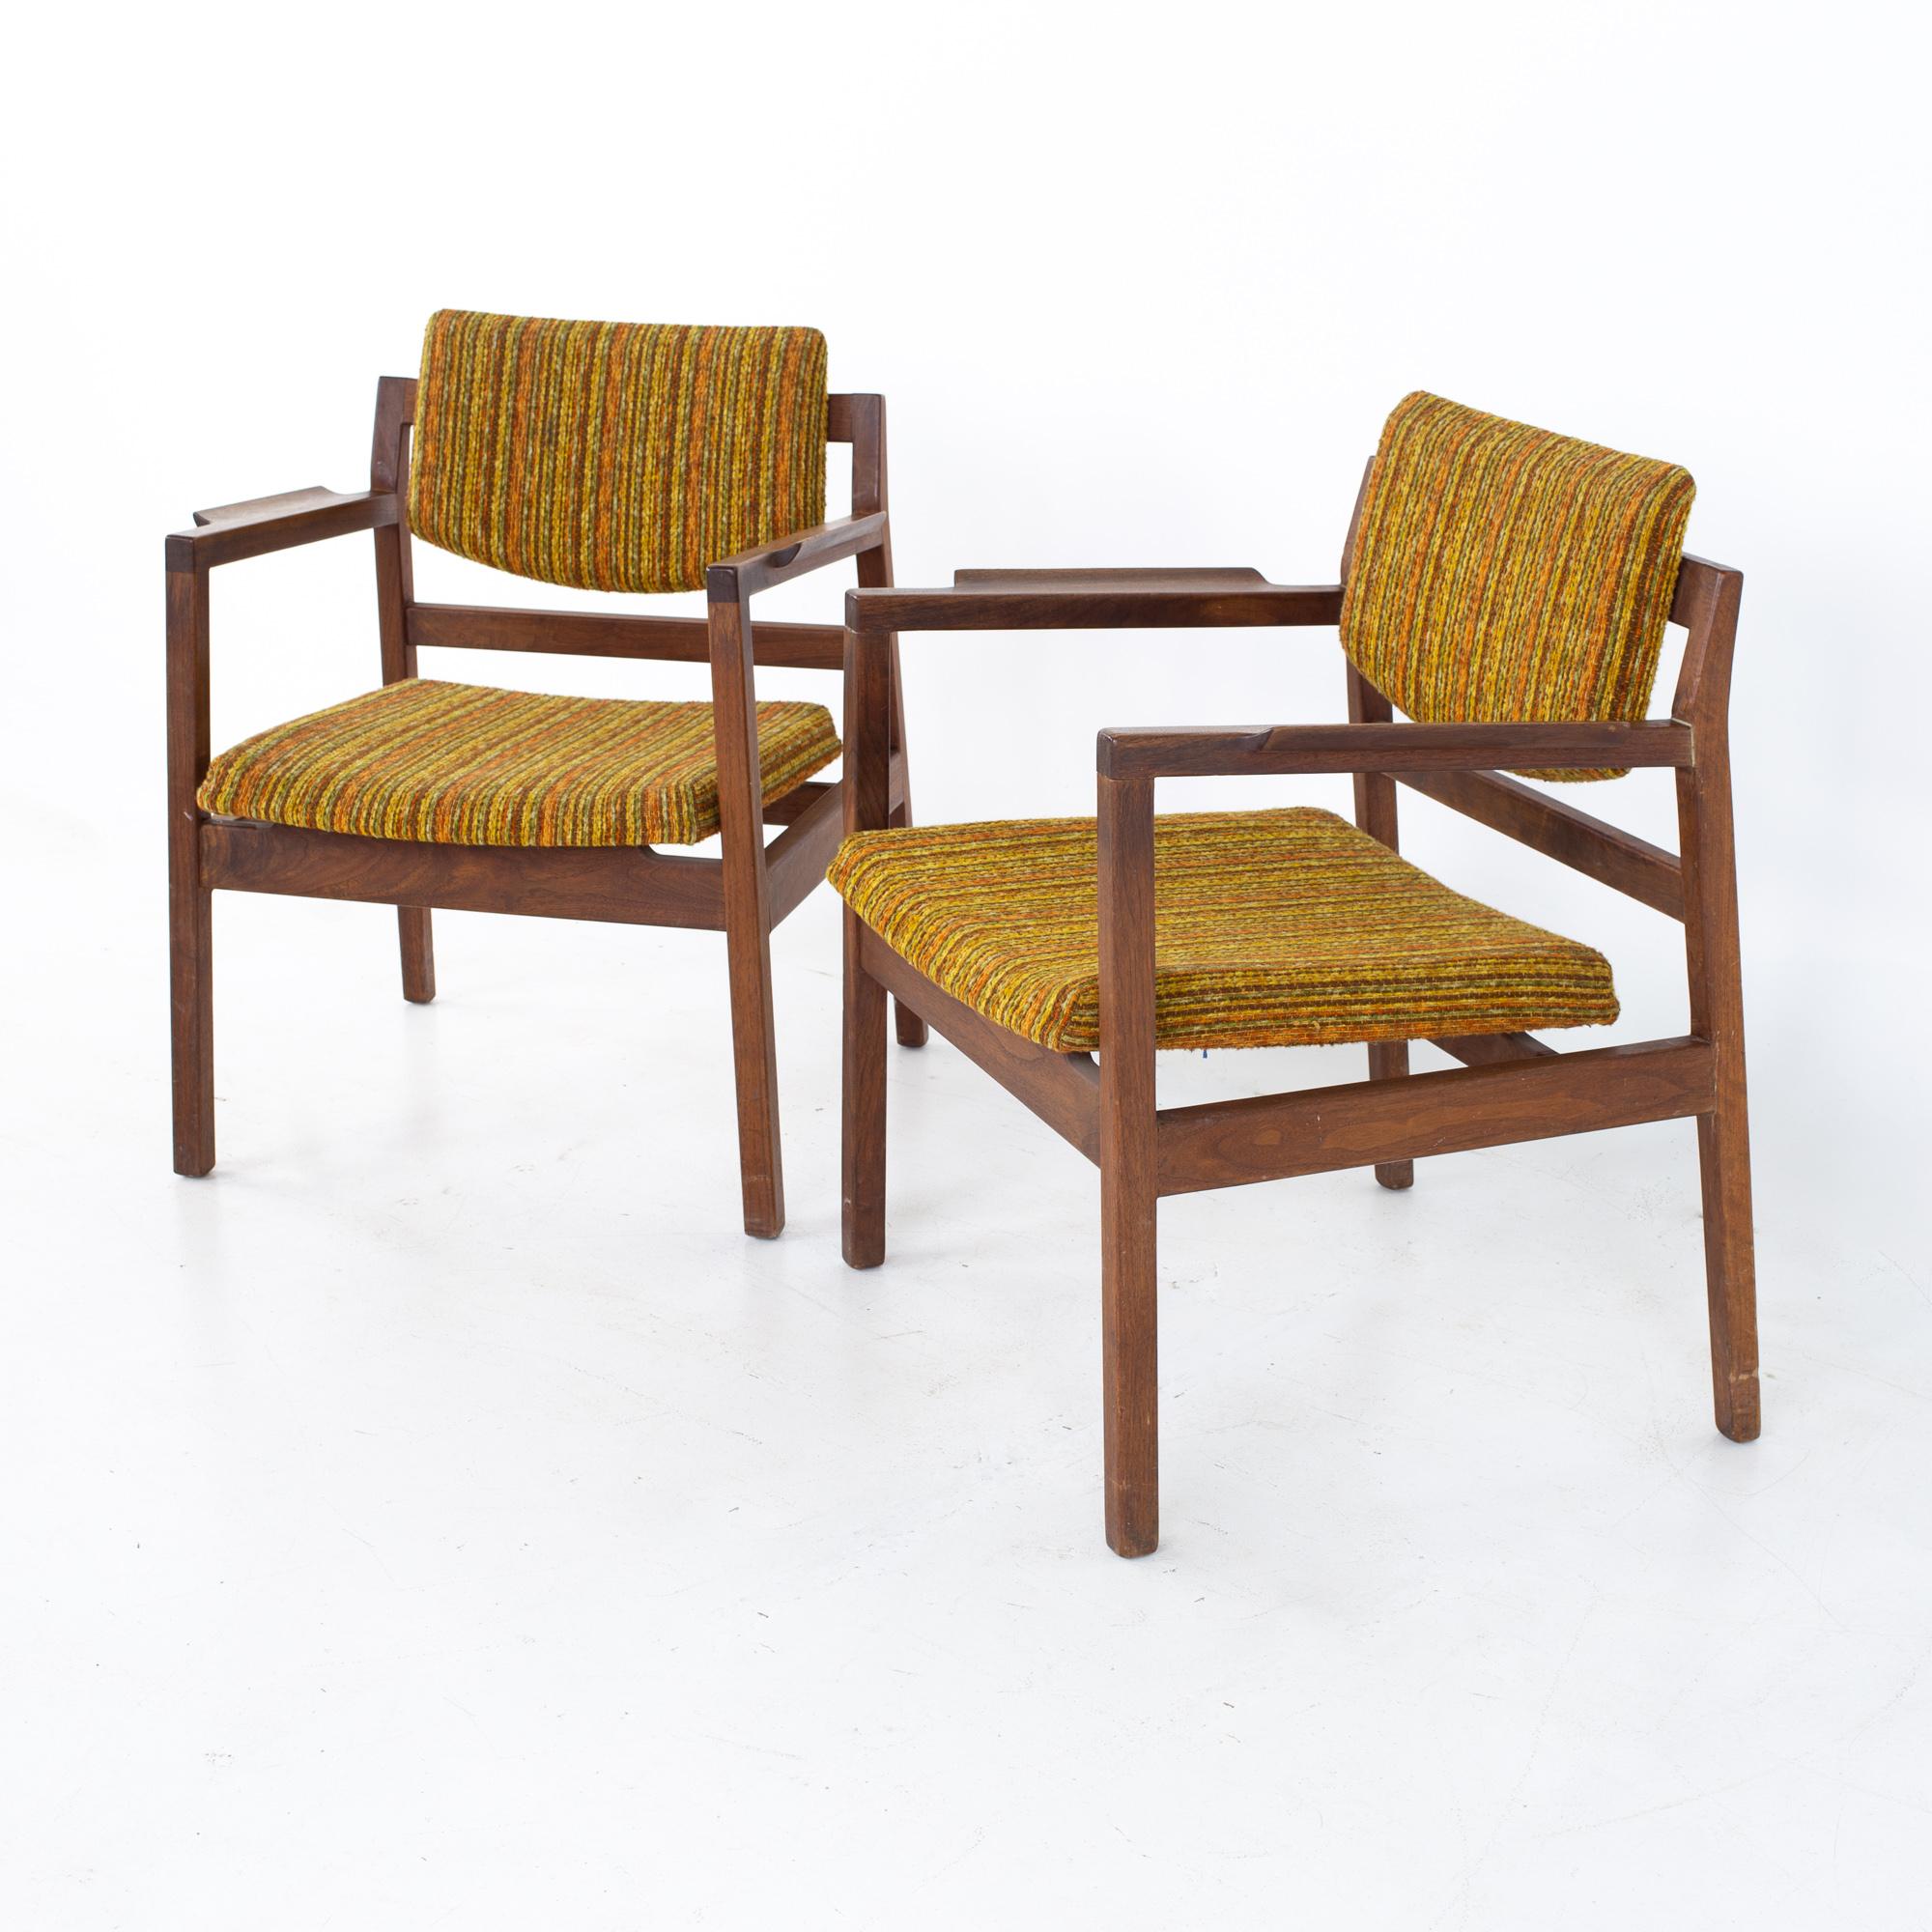 Jens Risom mid century arm chairs - a pair
Each chair measures: 24 wide x 23 deep x 31 high, with a seat height of 19.5 inches

All pieces of furniture can be had in what we call restored vintage condition. That means the piece is restored upon